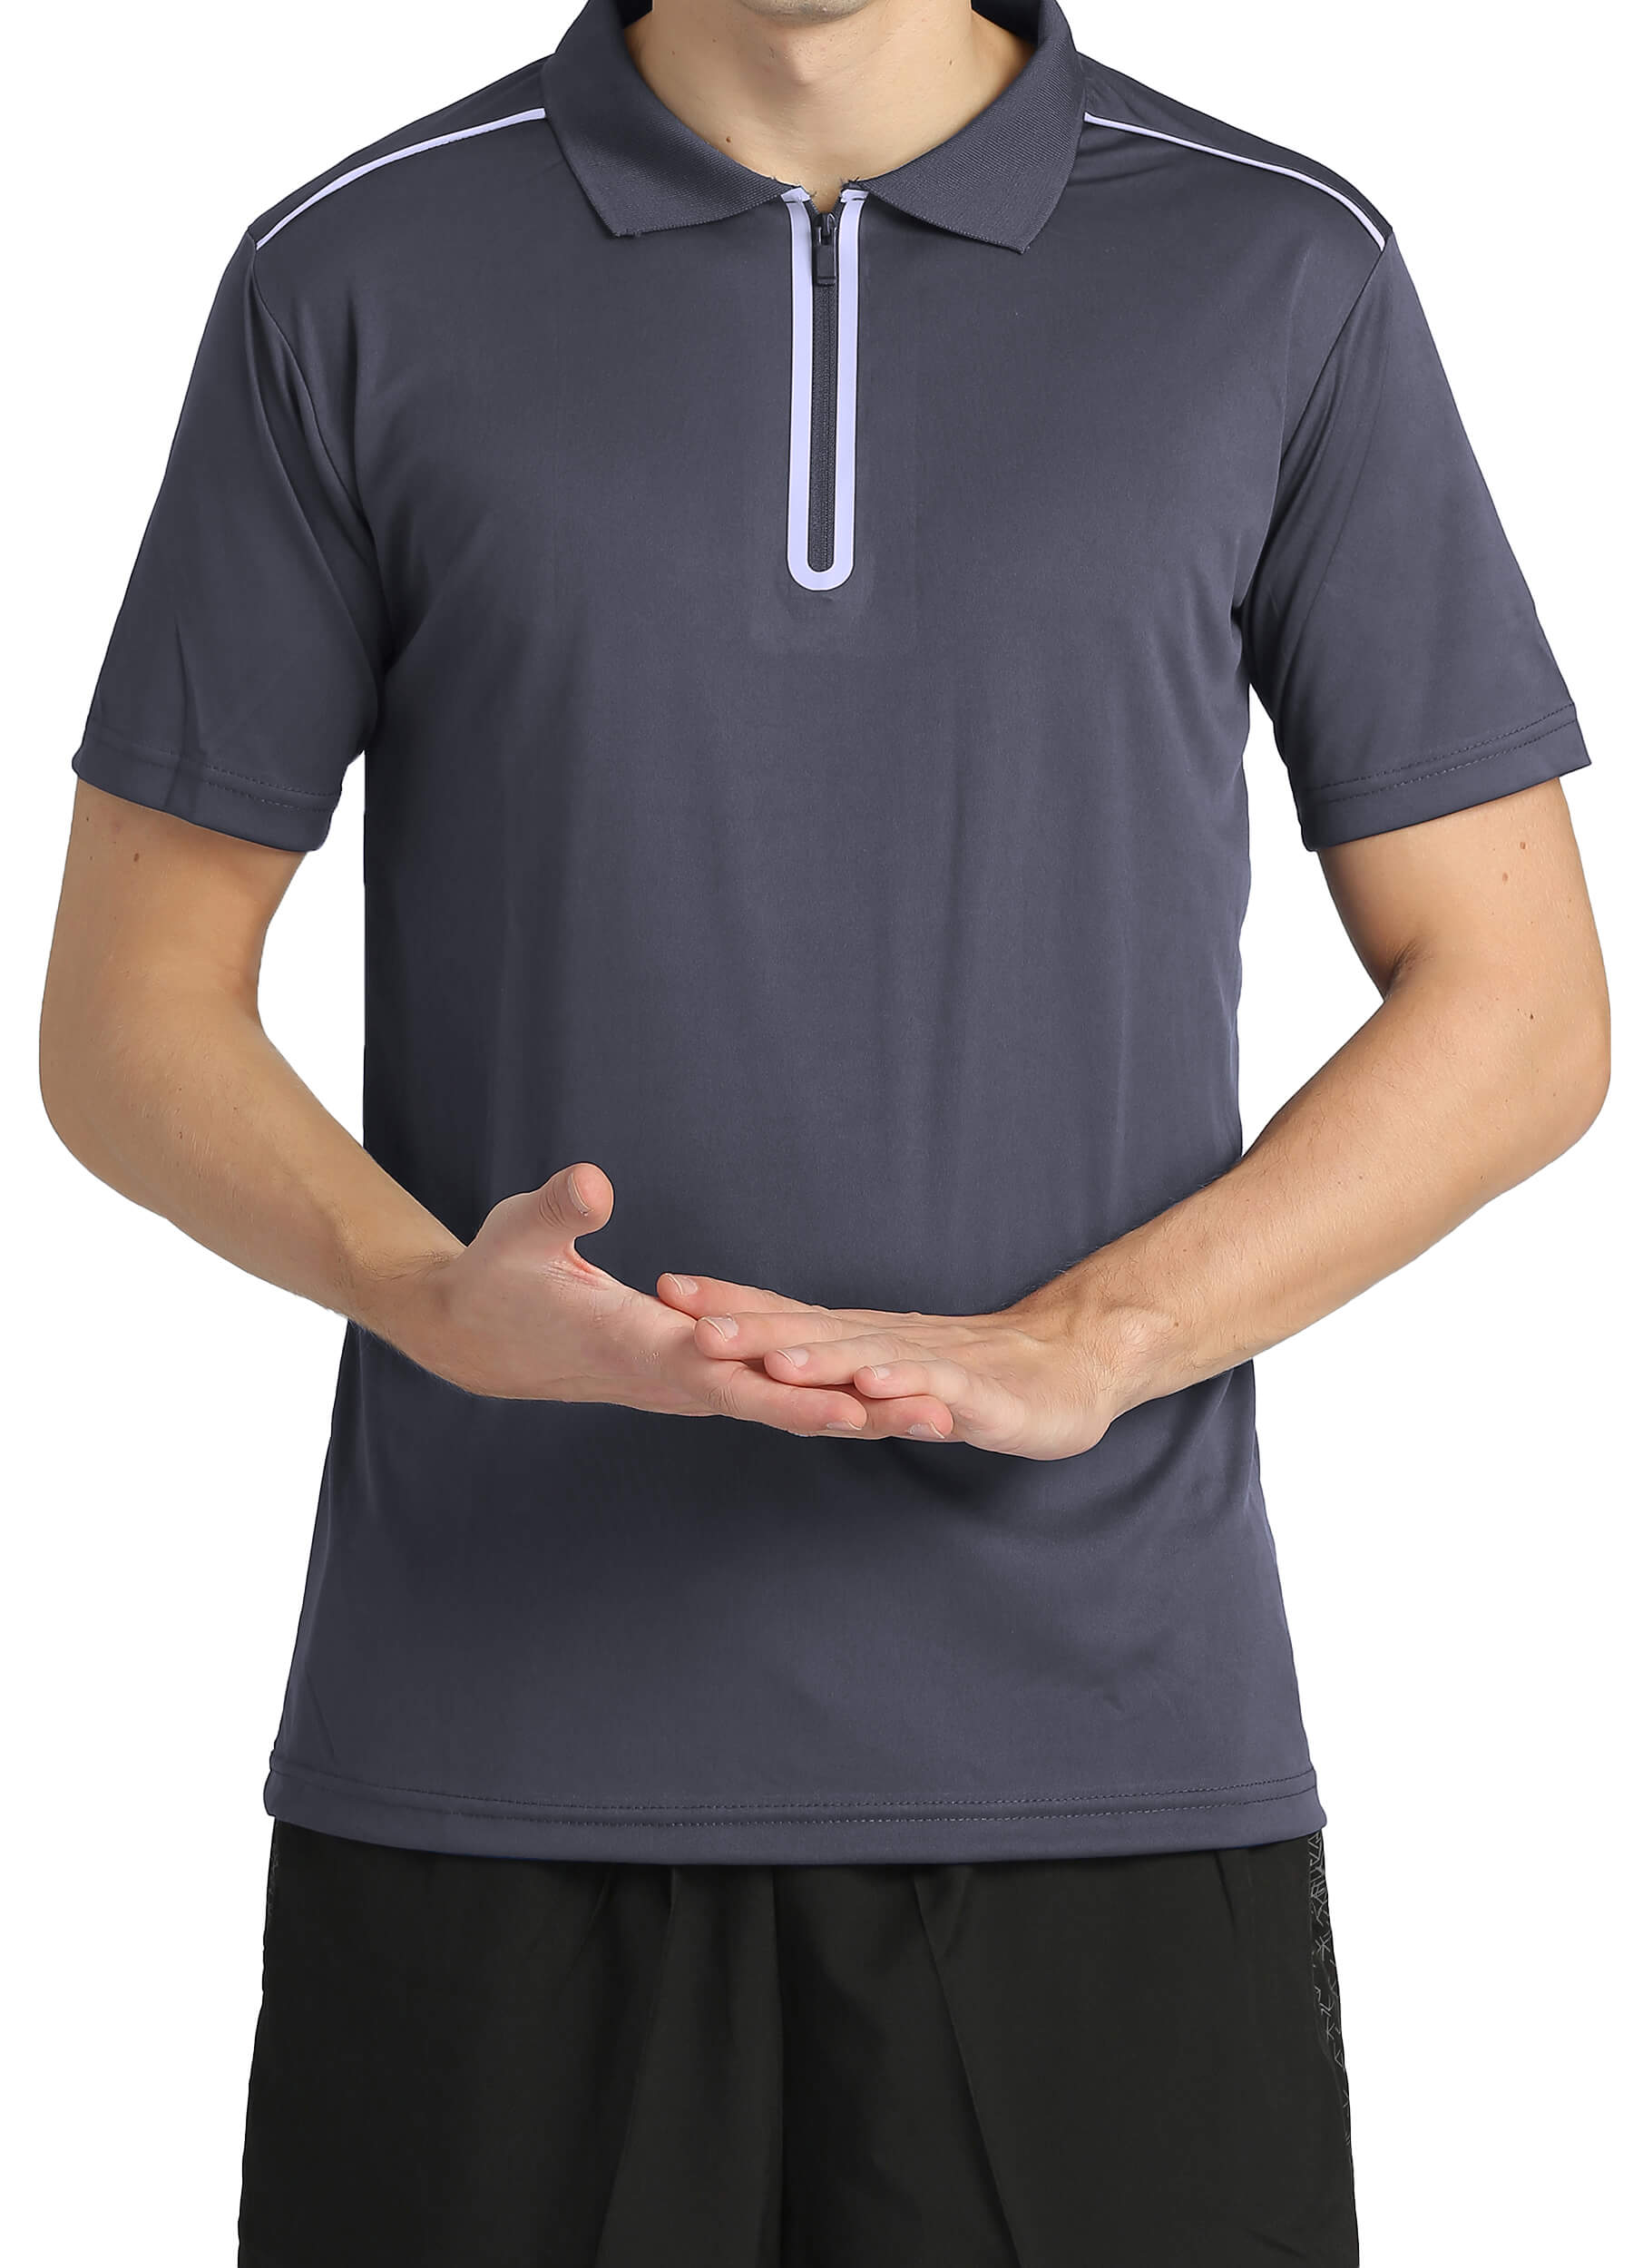 4POSE Men's Drak Grey Moisture Wicking Quick Dry Golf Workout Polo Shirt (Clearance)